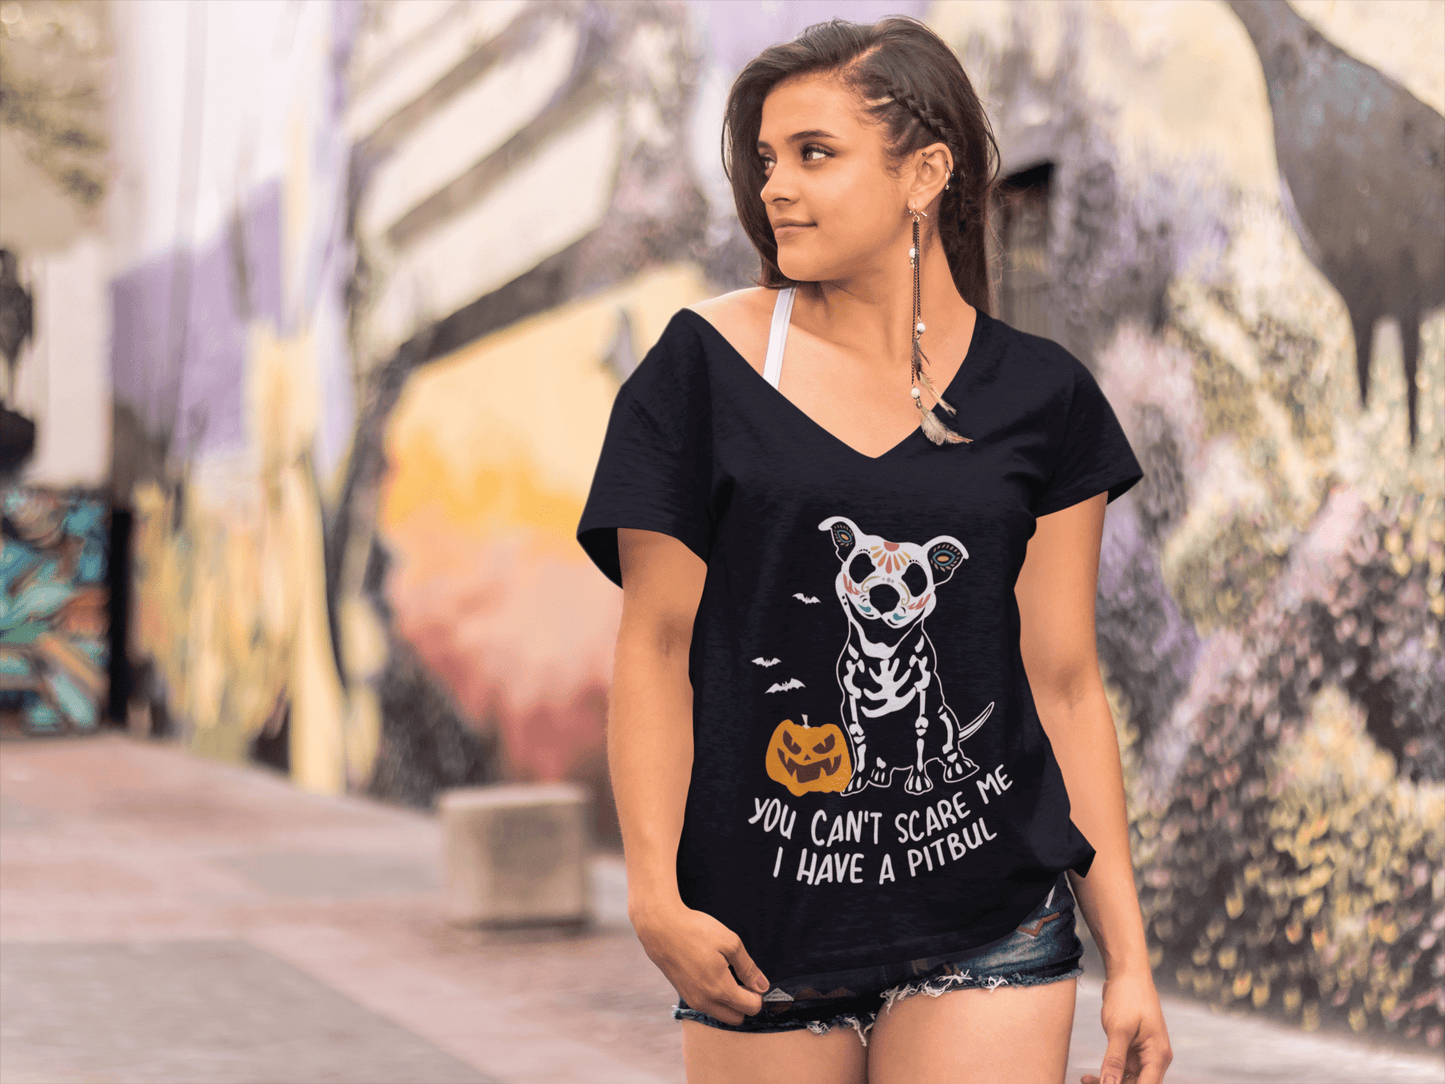 ULTRABASIC Women's T-Shirt You Can't Scare Me I Have a Pitbull - Funny Shirt